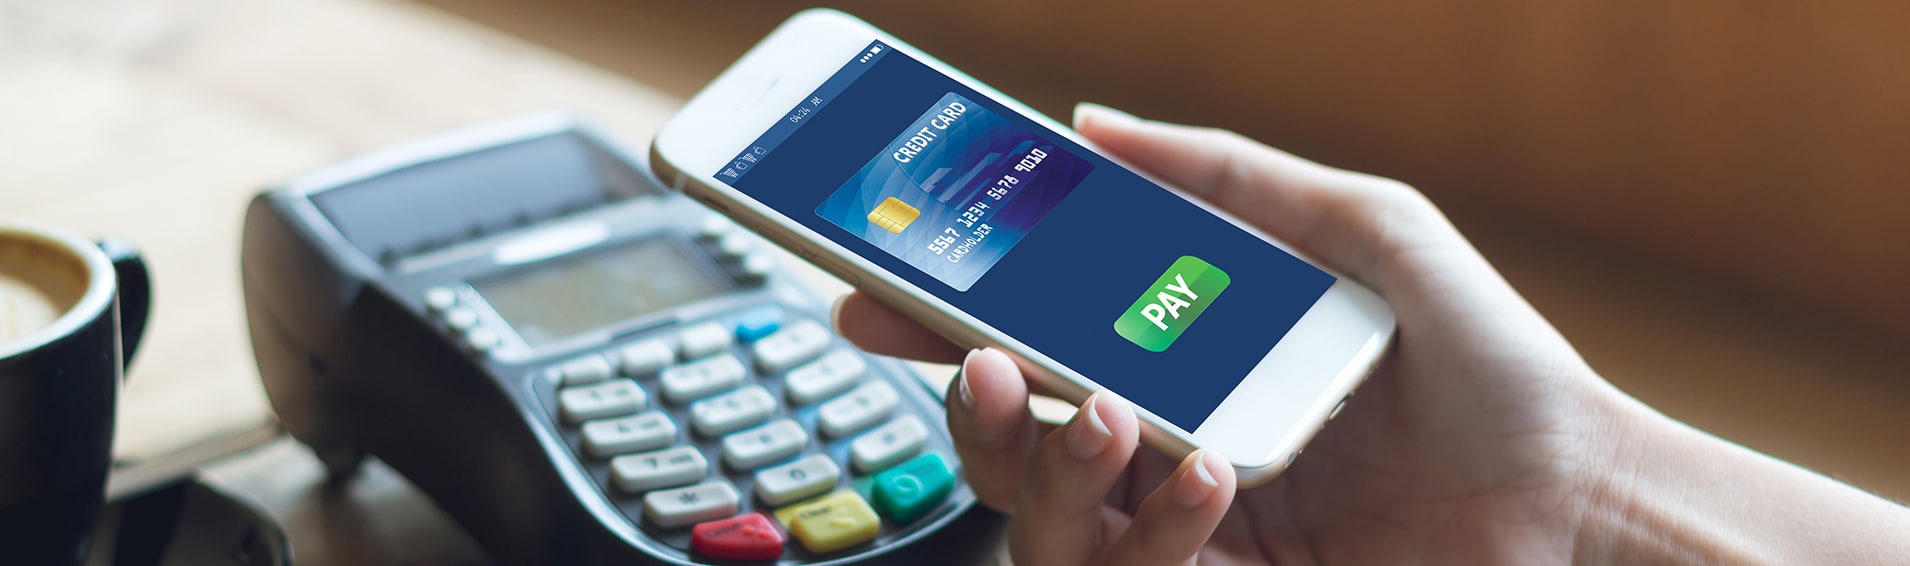 Mobile Wallets: Breaking Down the Walls Between Consumers and Banks